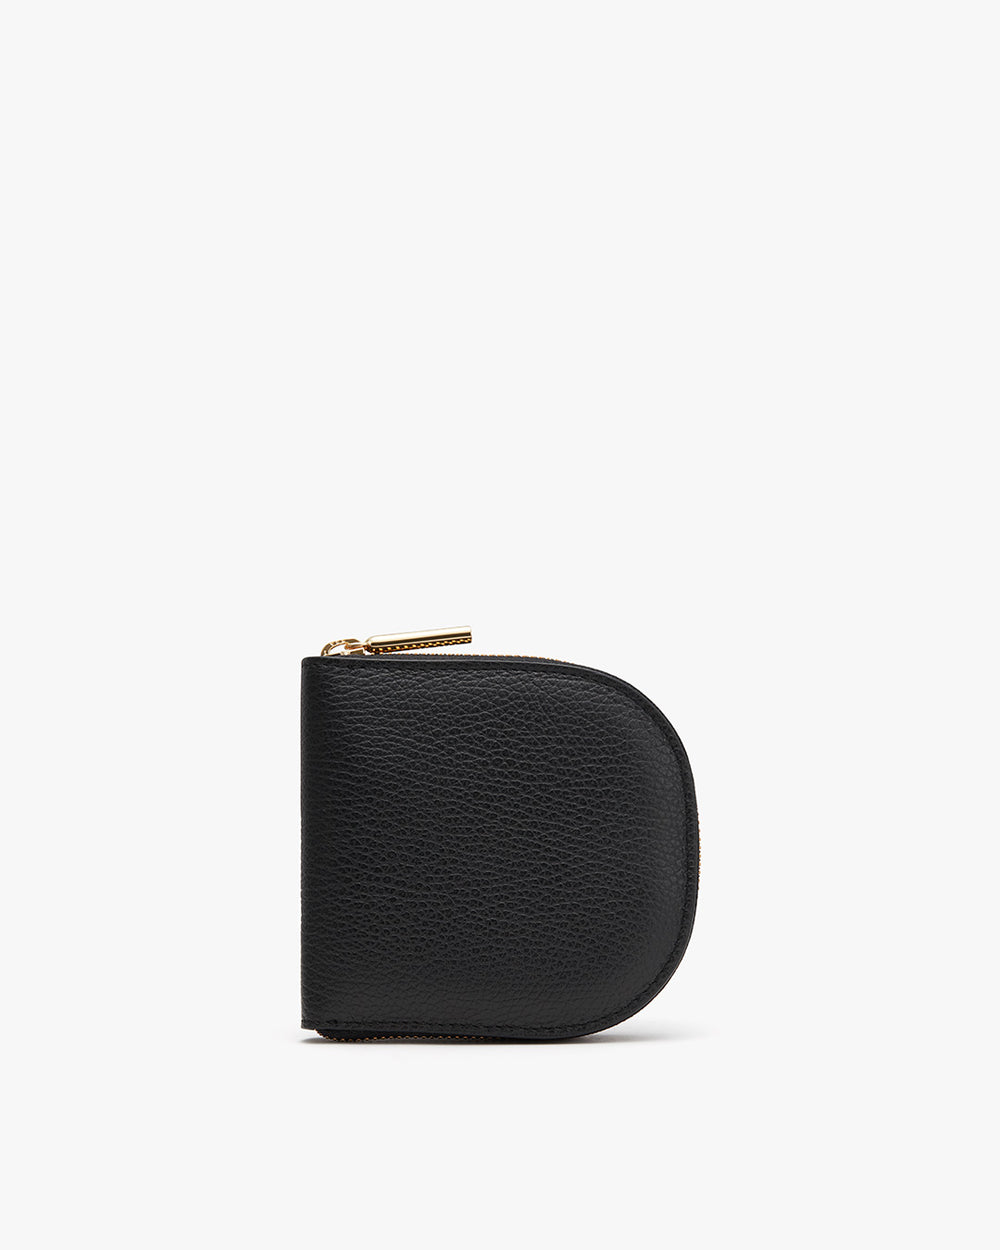 Small rounded zippered wallet standing upright on a plain background.